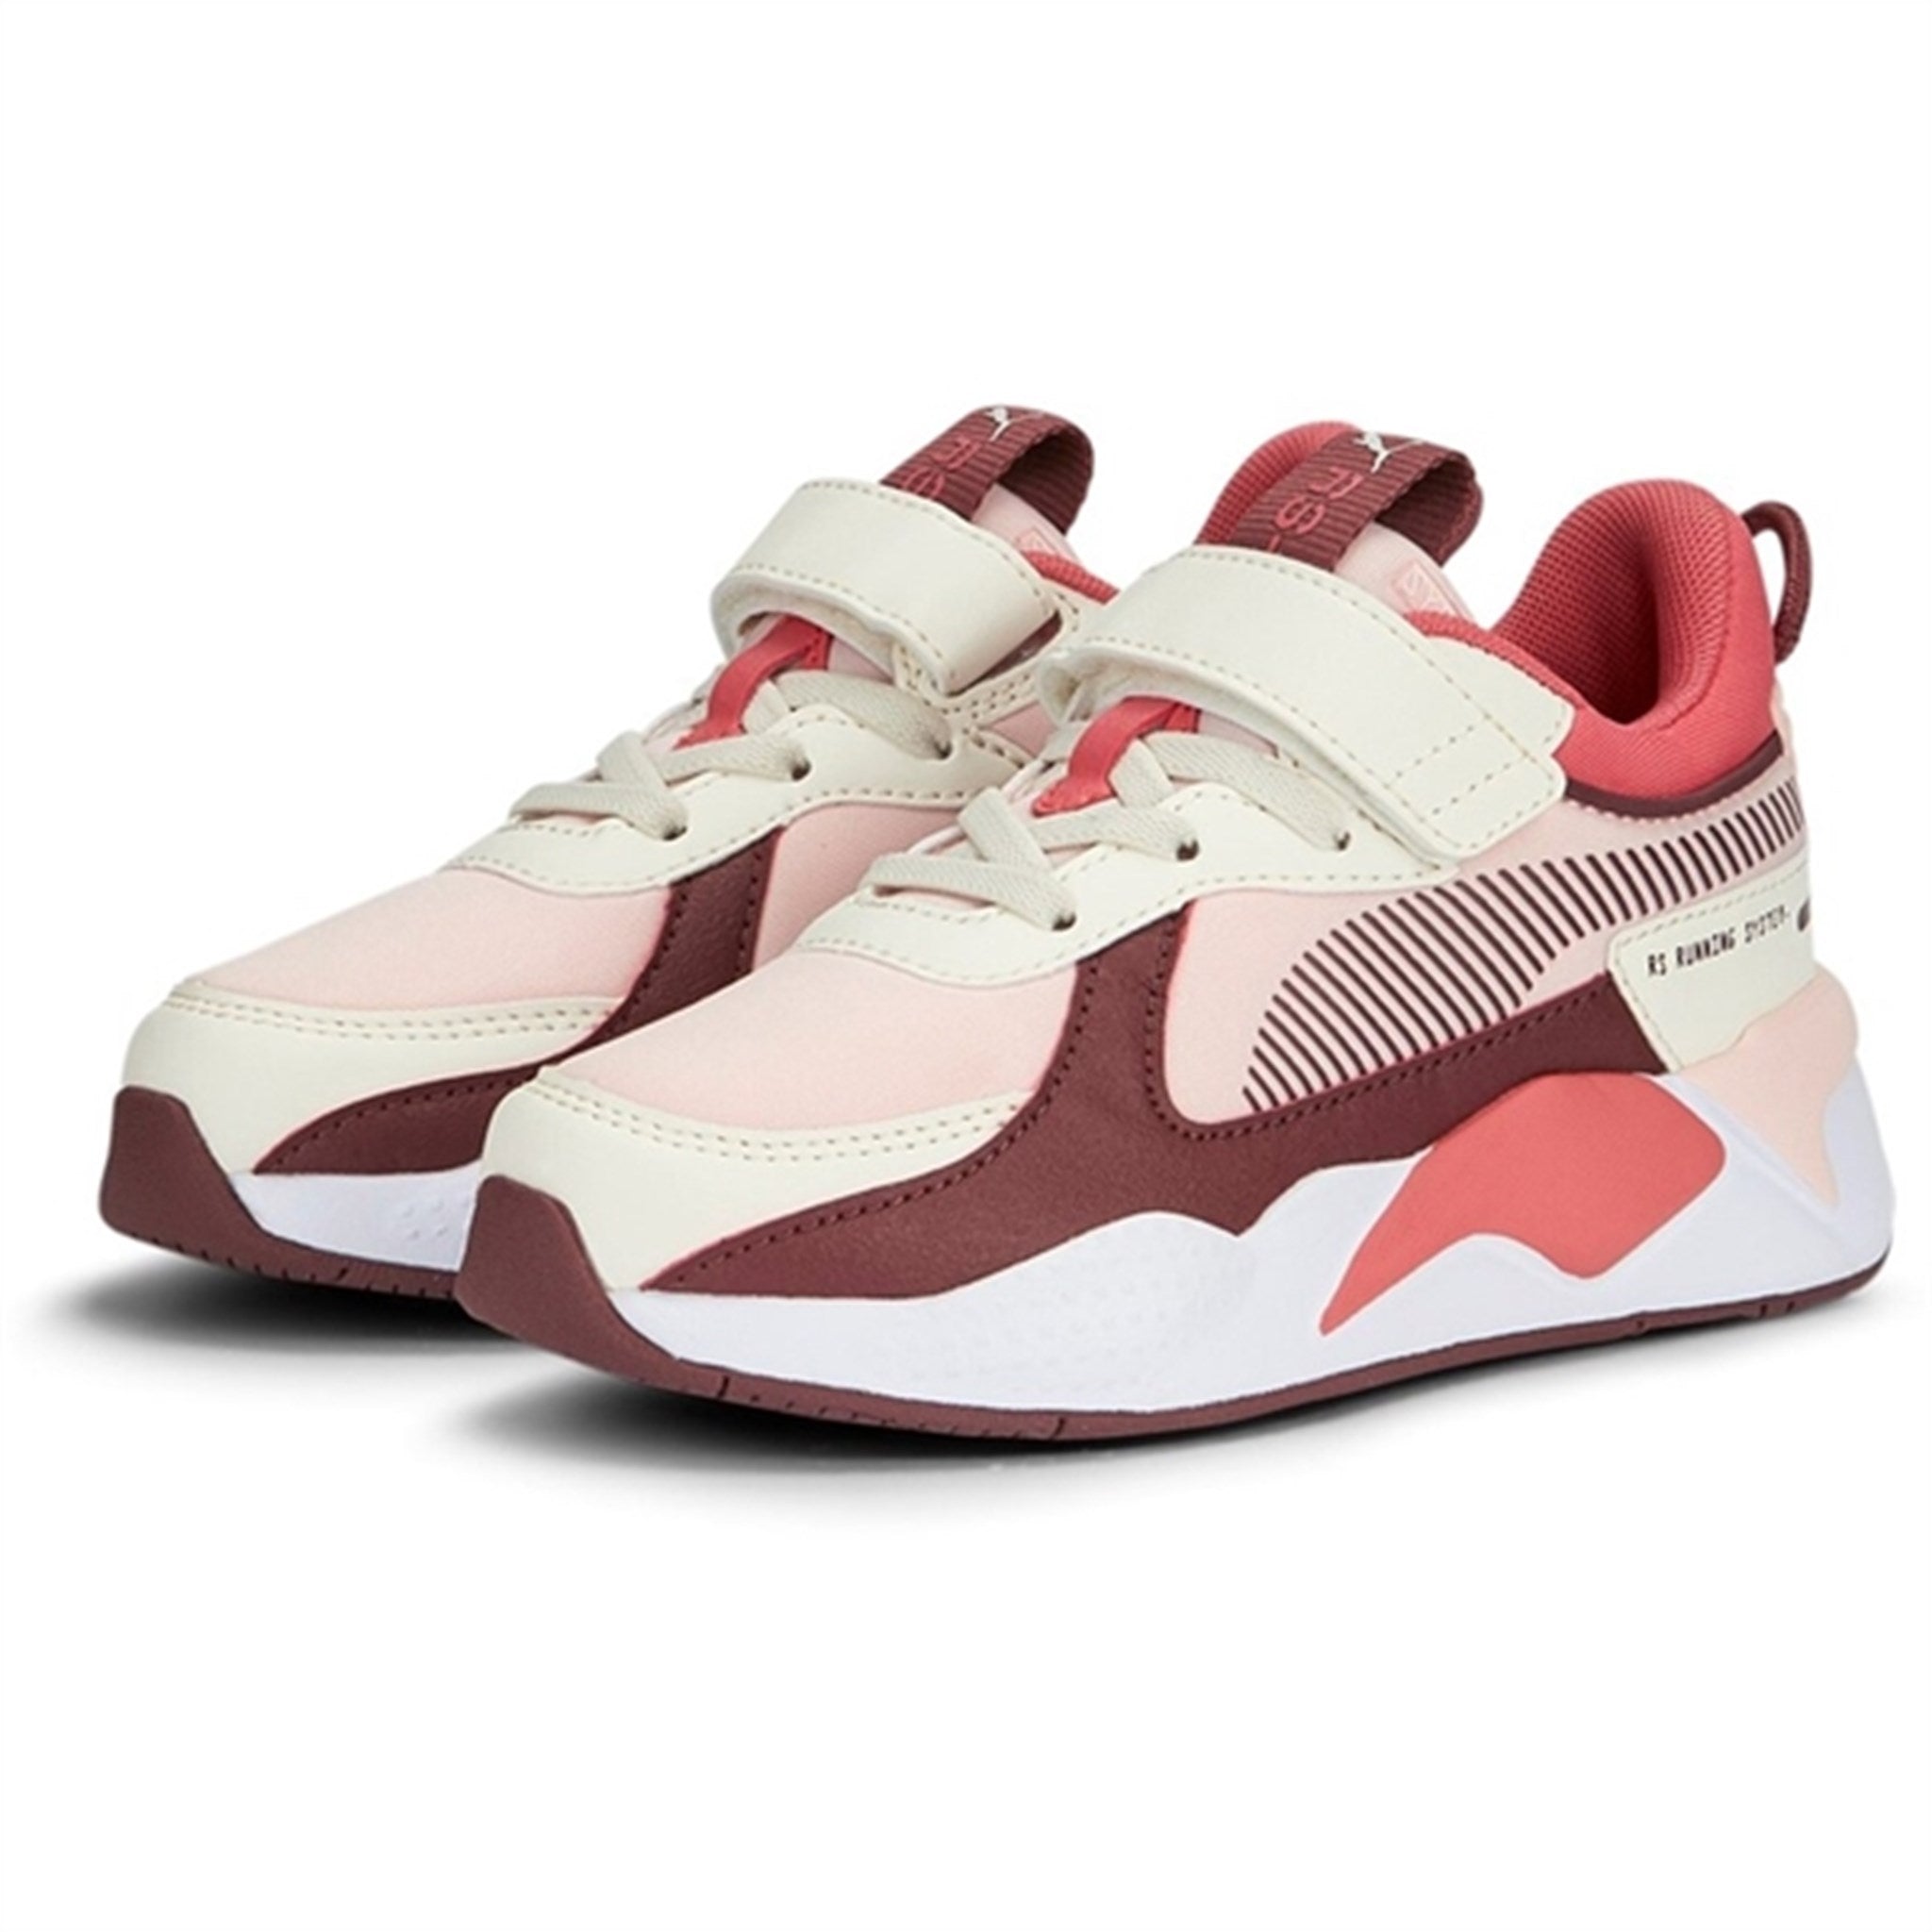 Puma RS-X Dreamy AC+ PS Rose Dust-Wood Violet Sneakers